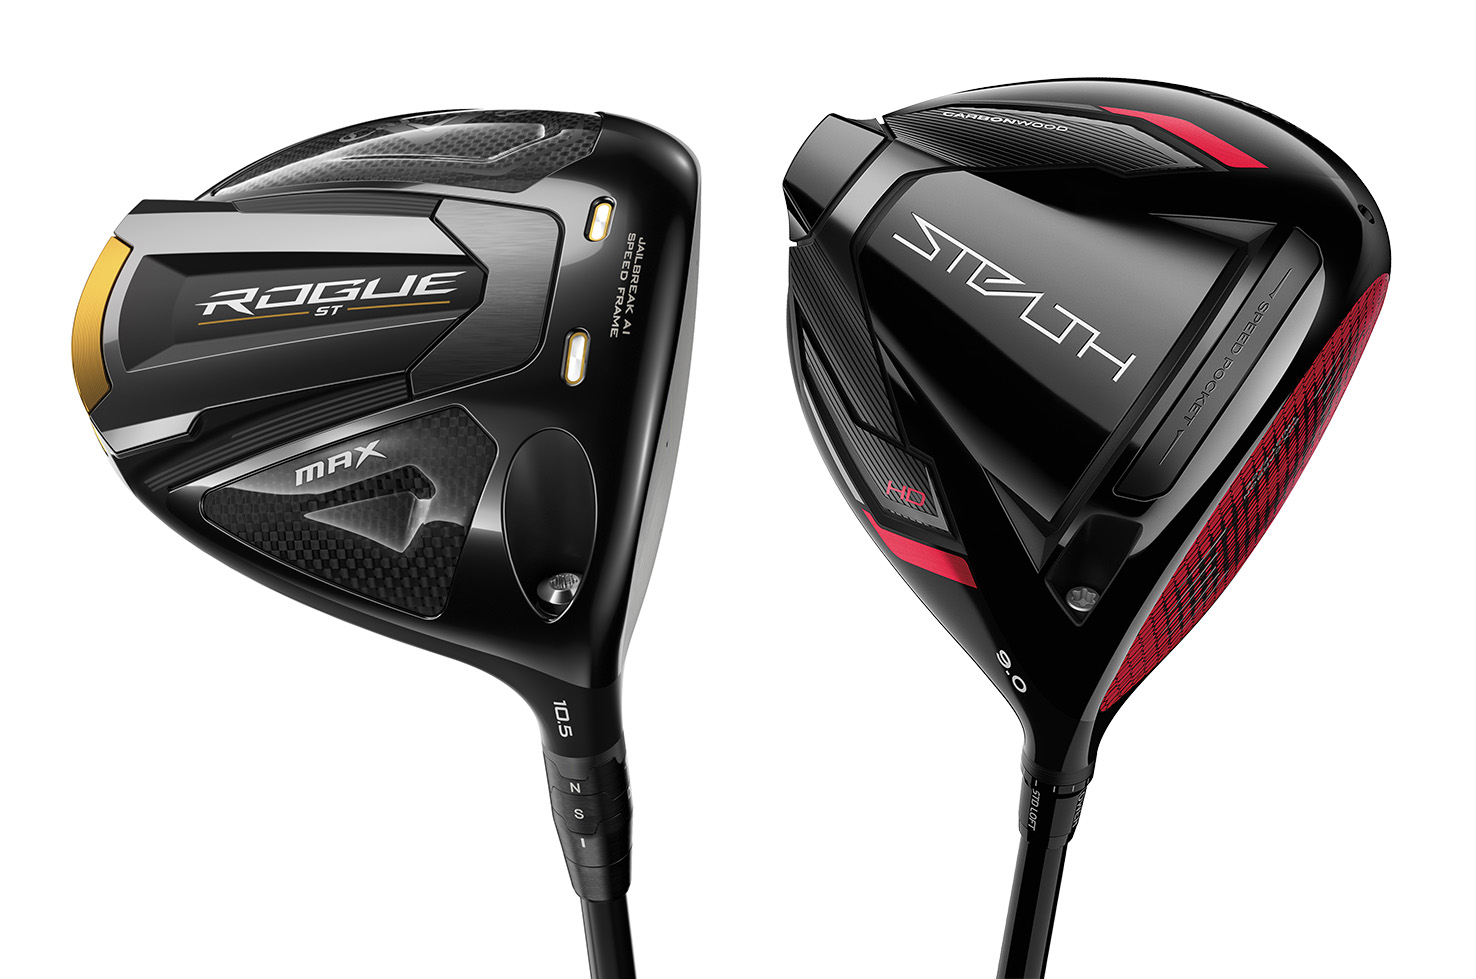 Callaway Rogue ST Max/TaylorMade Stealth : le choc des drivers !